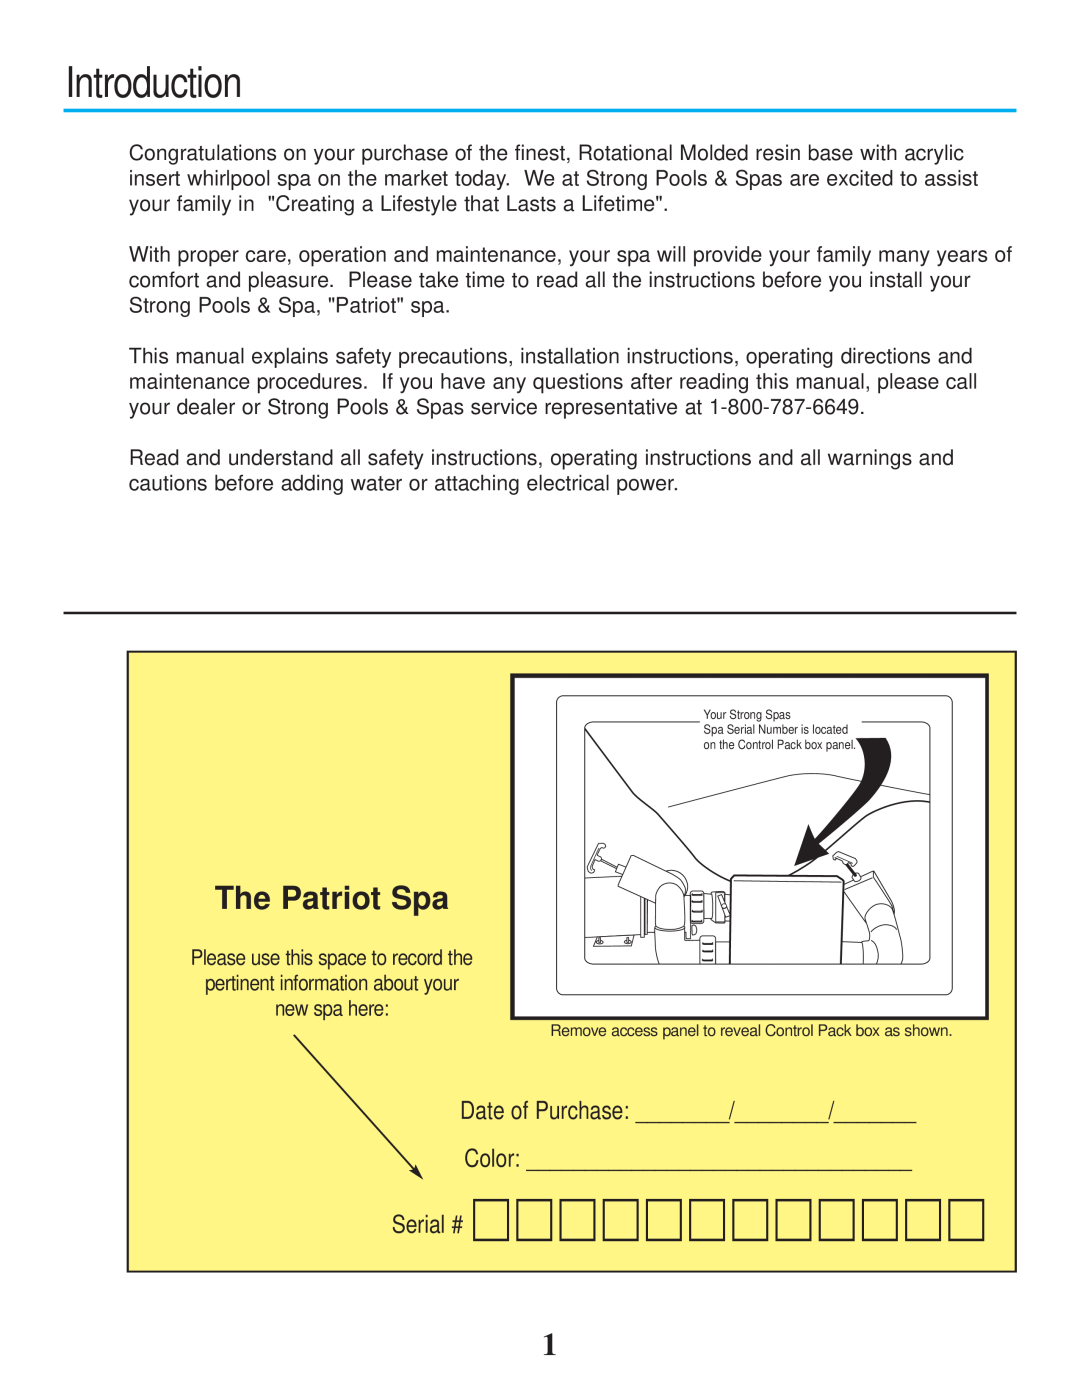 Strong Pools and Spas owner manual Introduction, The Patriot Spa, Date of Purchase, Color Serial # 